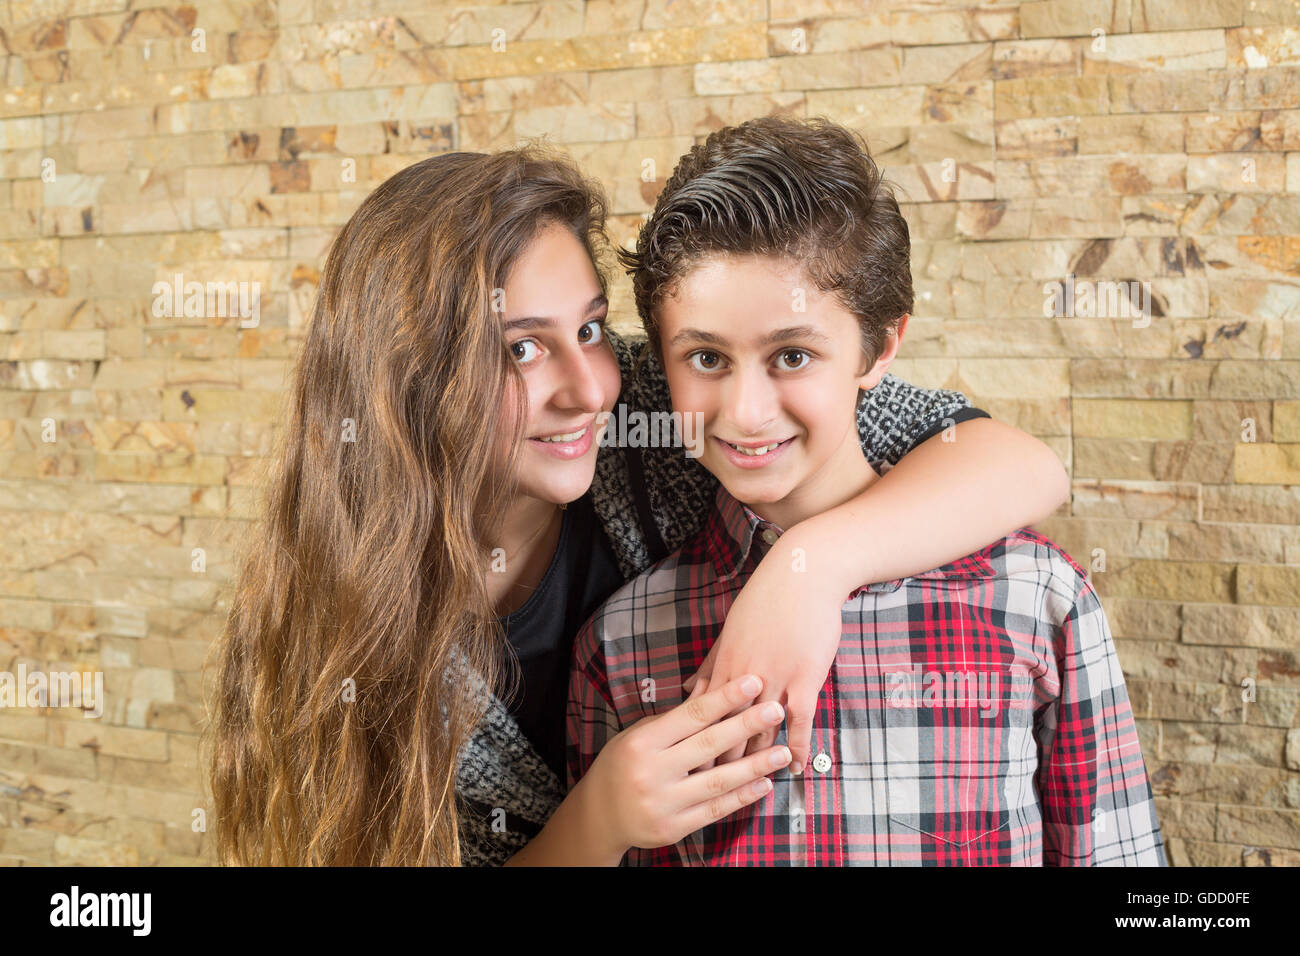 Happy brother and sister smiling Stock Photo